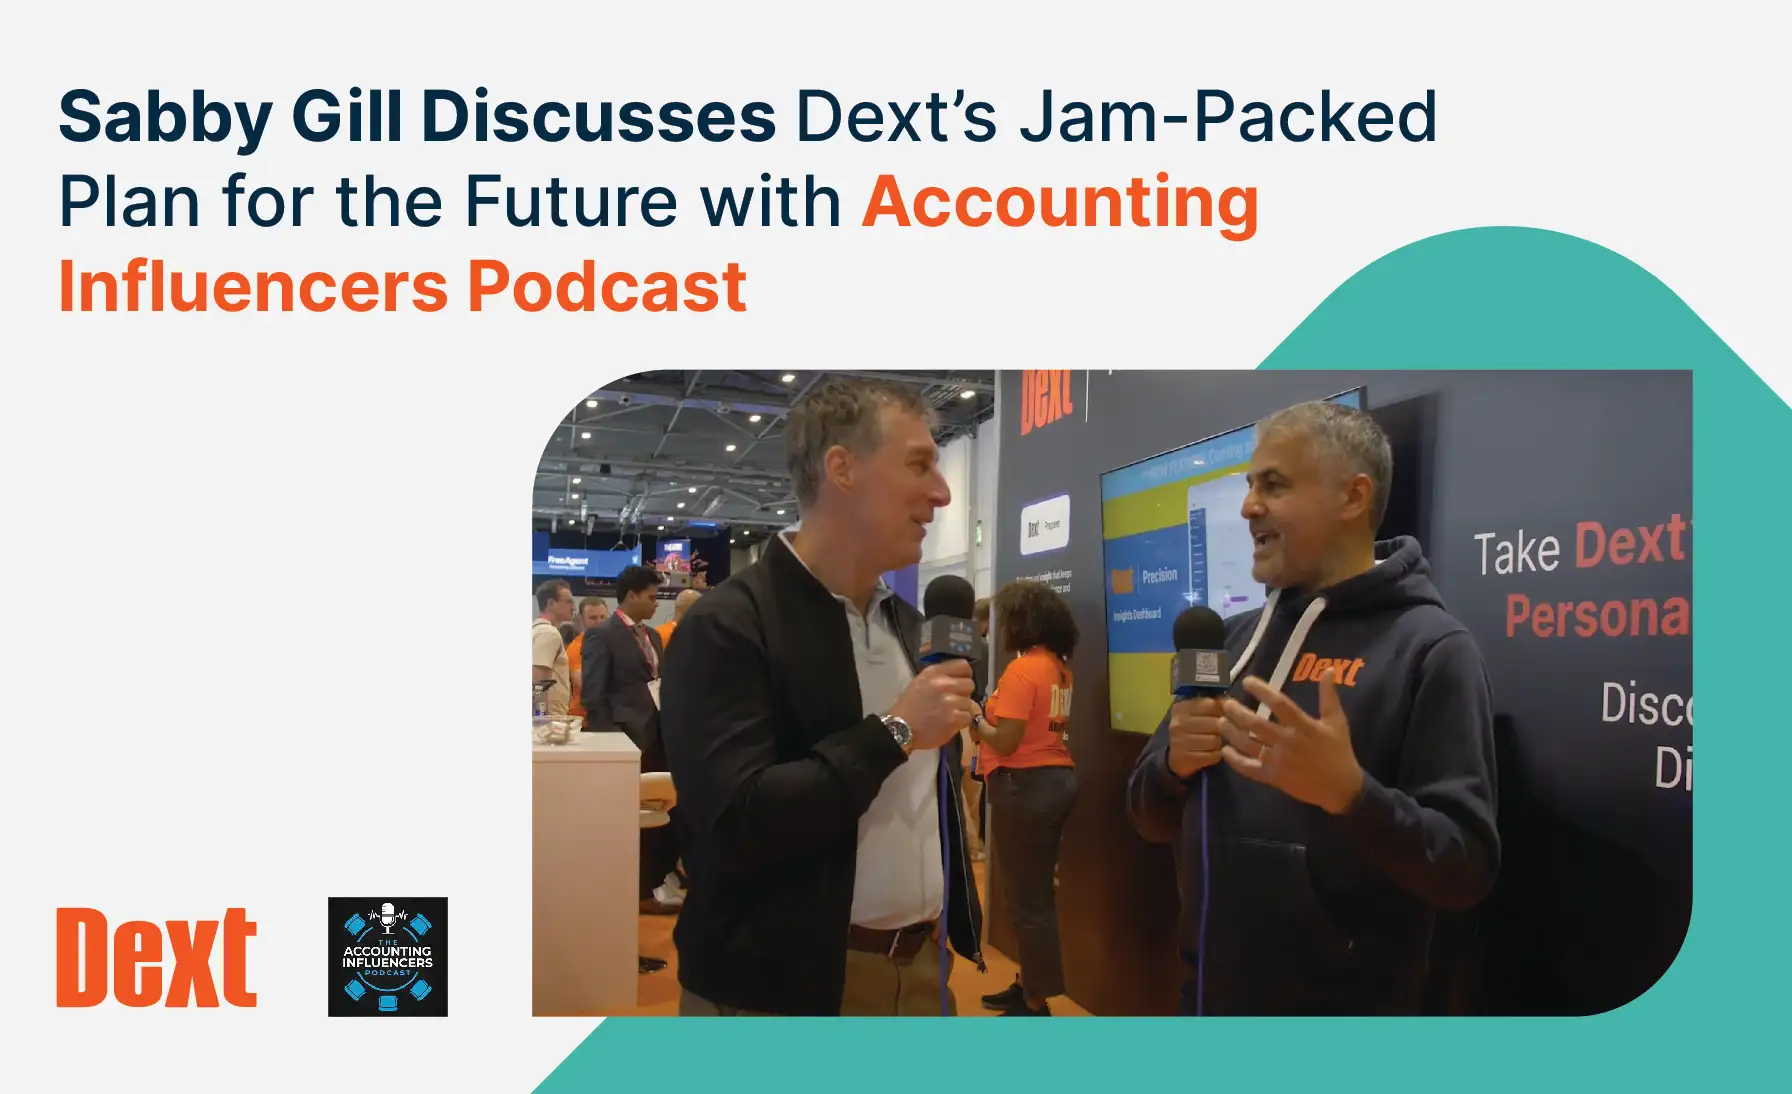 Sabby Gill Discusses Dext’s Jam-Packed Plan for the Future logo